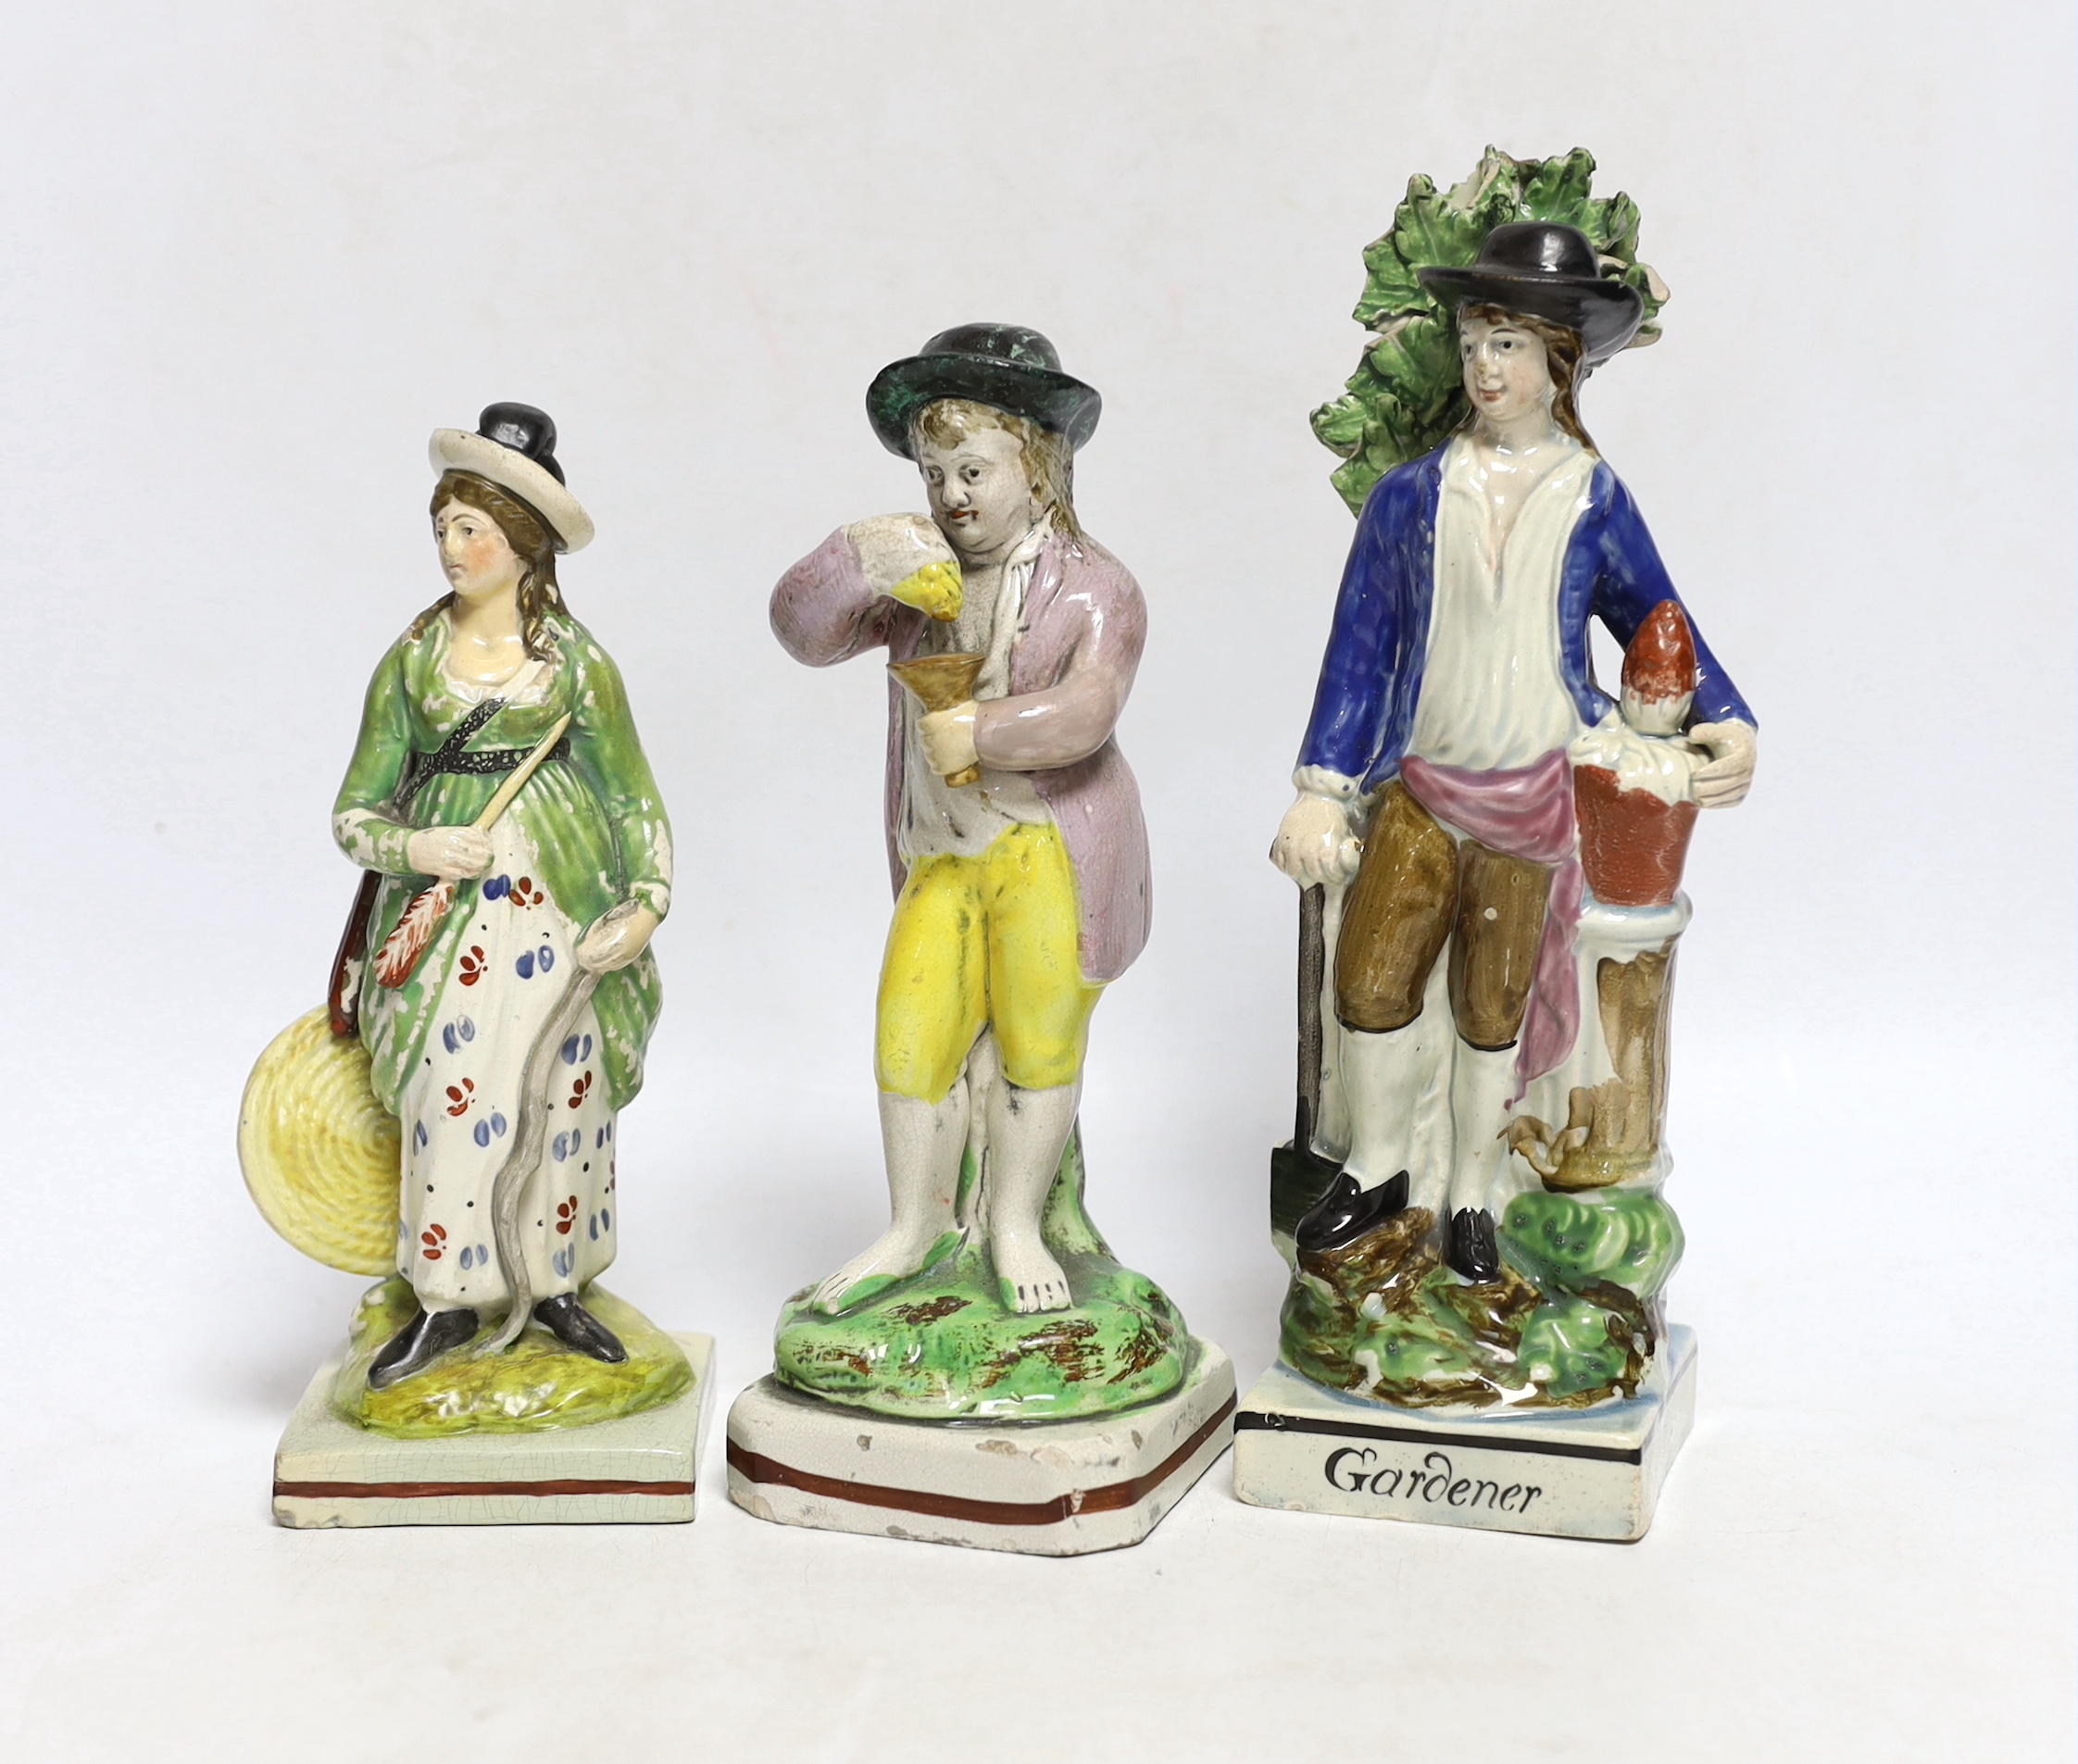 Three Staffordshire pearlware figures of a boy with grapes, a lady archer and a 'Gardener', largest 22cm high